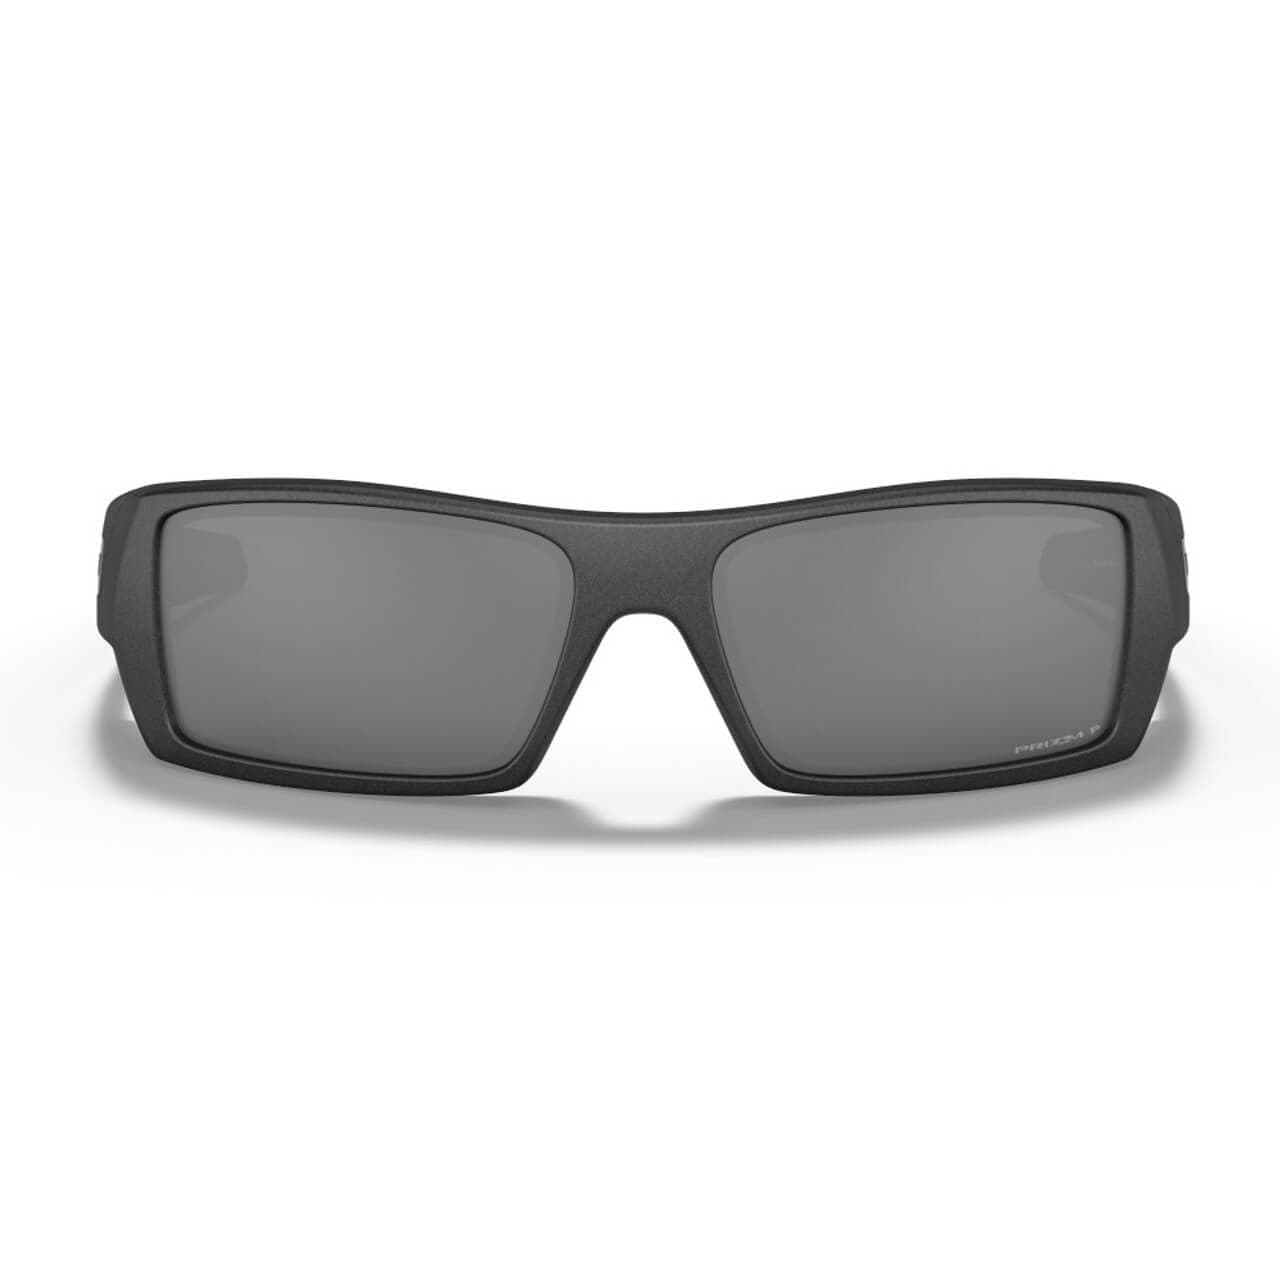 Oakley Gascan Sunglasses OO9014-3560 Steel Frame with Prizm Black Polarized Lens Front View